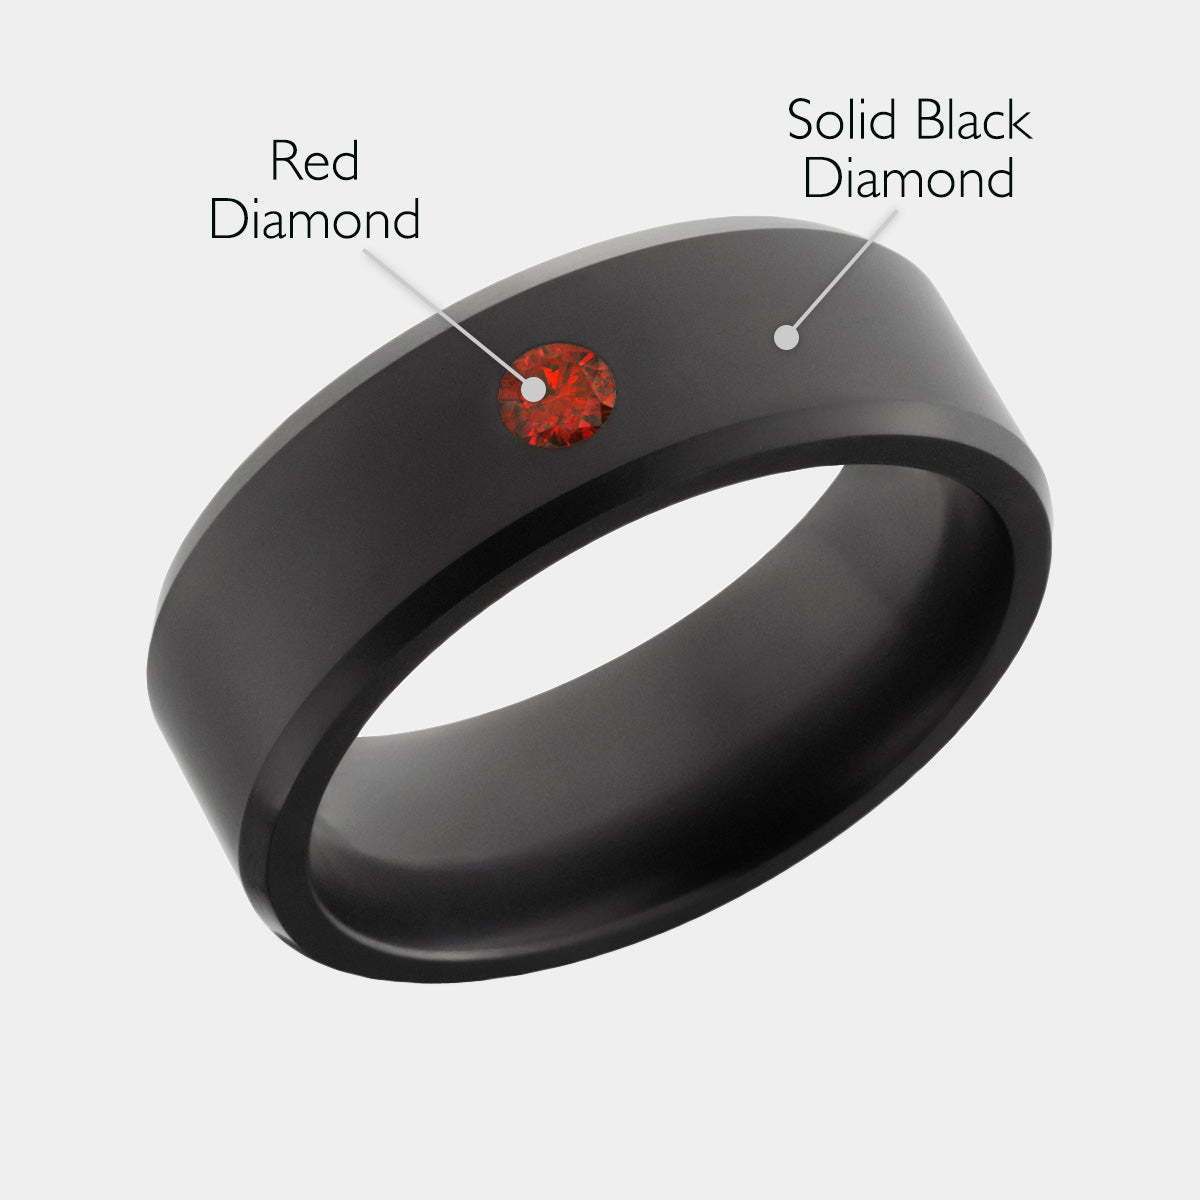 Men's Black Diamond & Red Diamond Inset with material descriptions listed | Elysium ARES | Men’s Red Diamond Rings | Red Diamond Wedding Ring